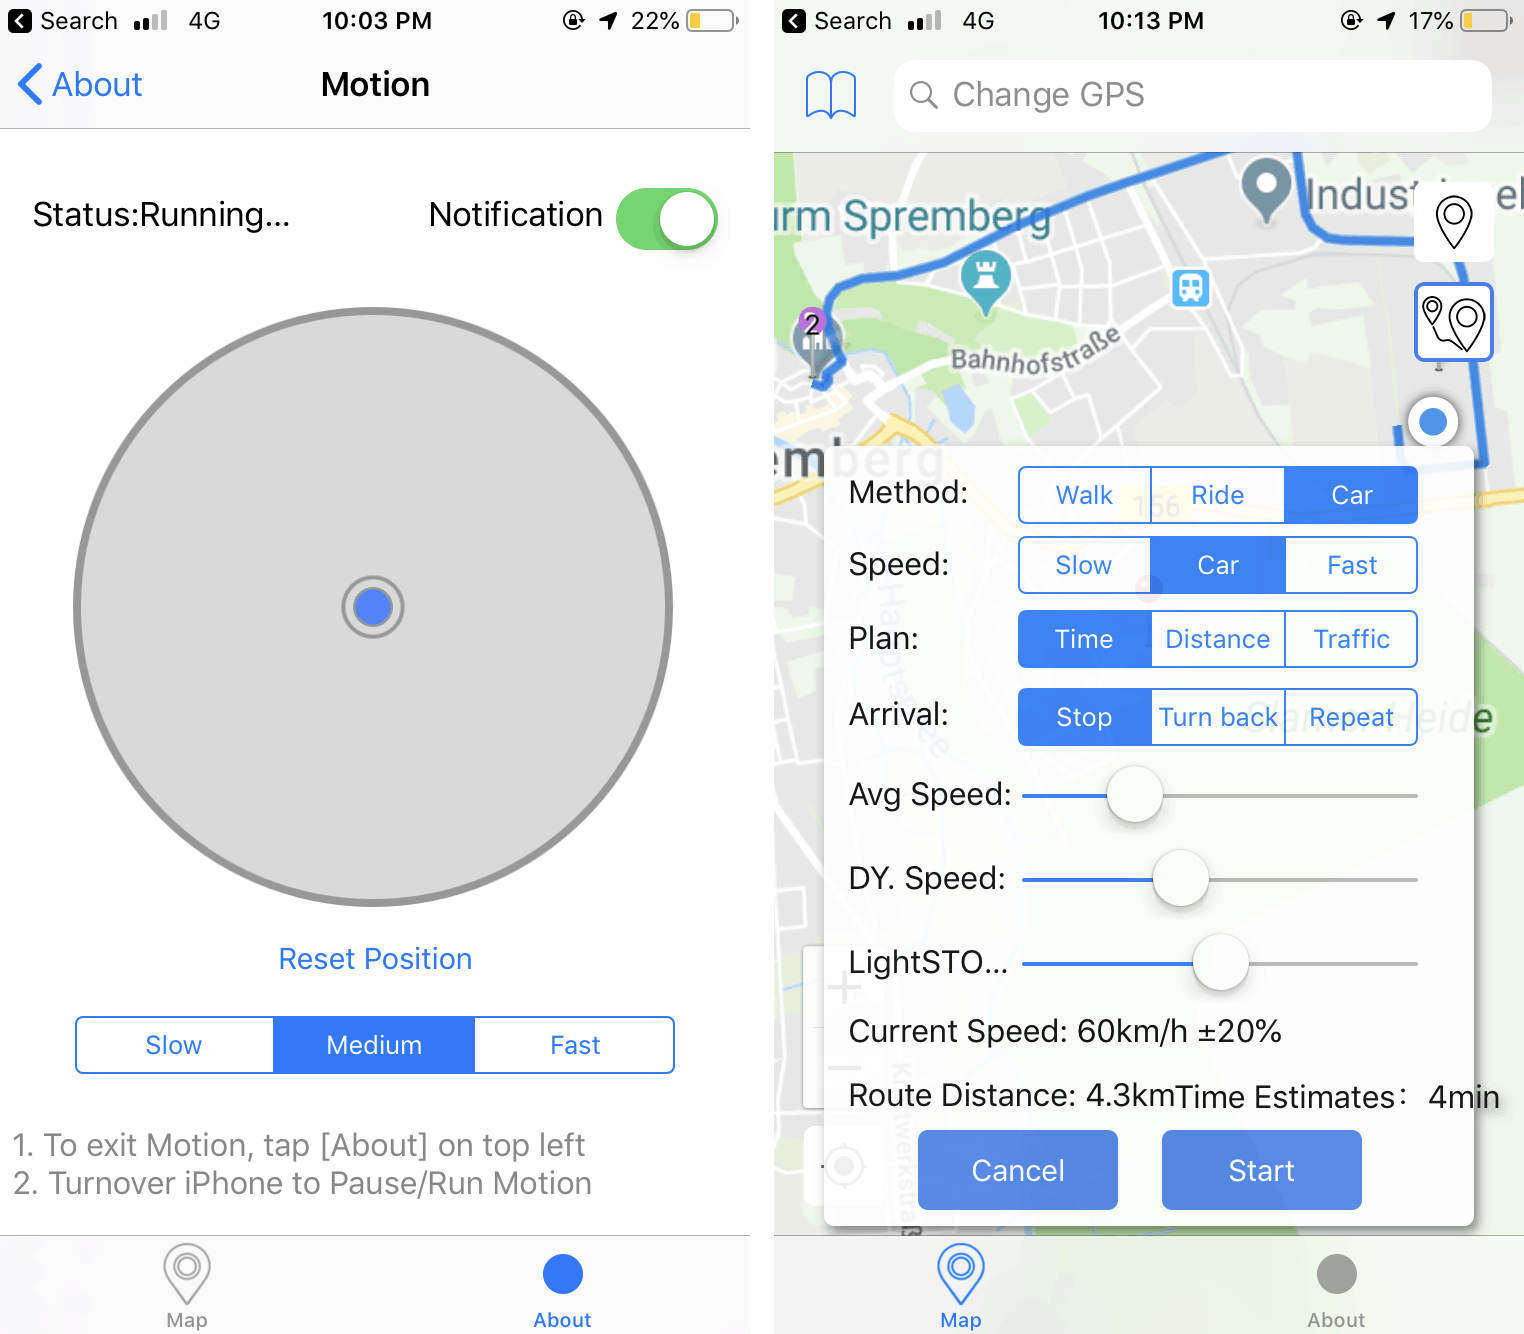 Change GPS location and move around in iPhone